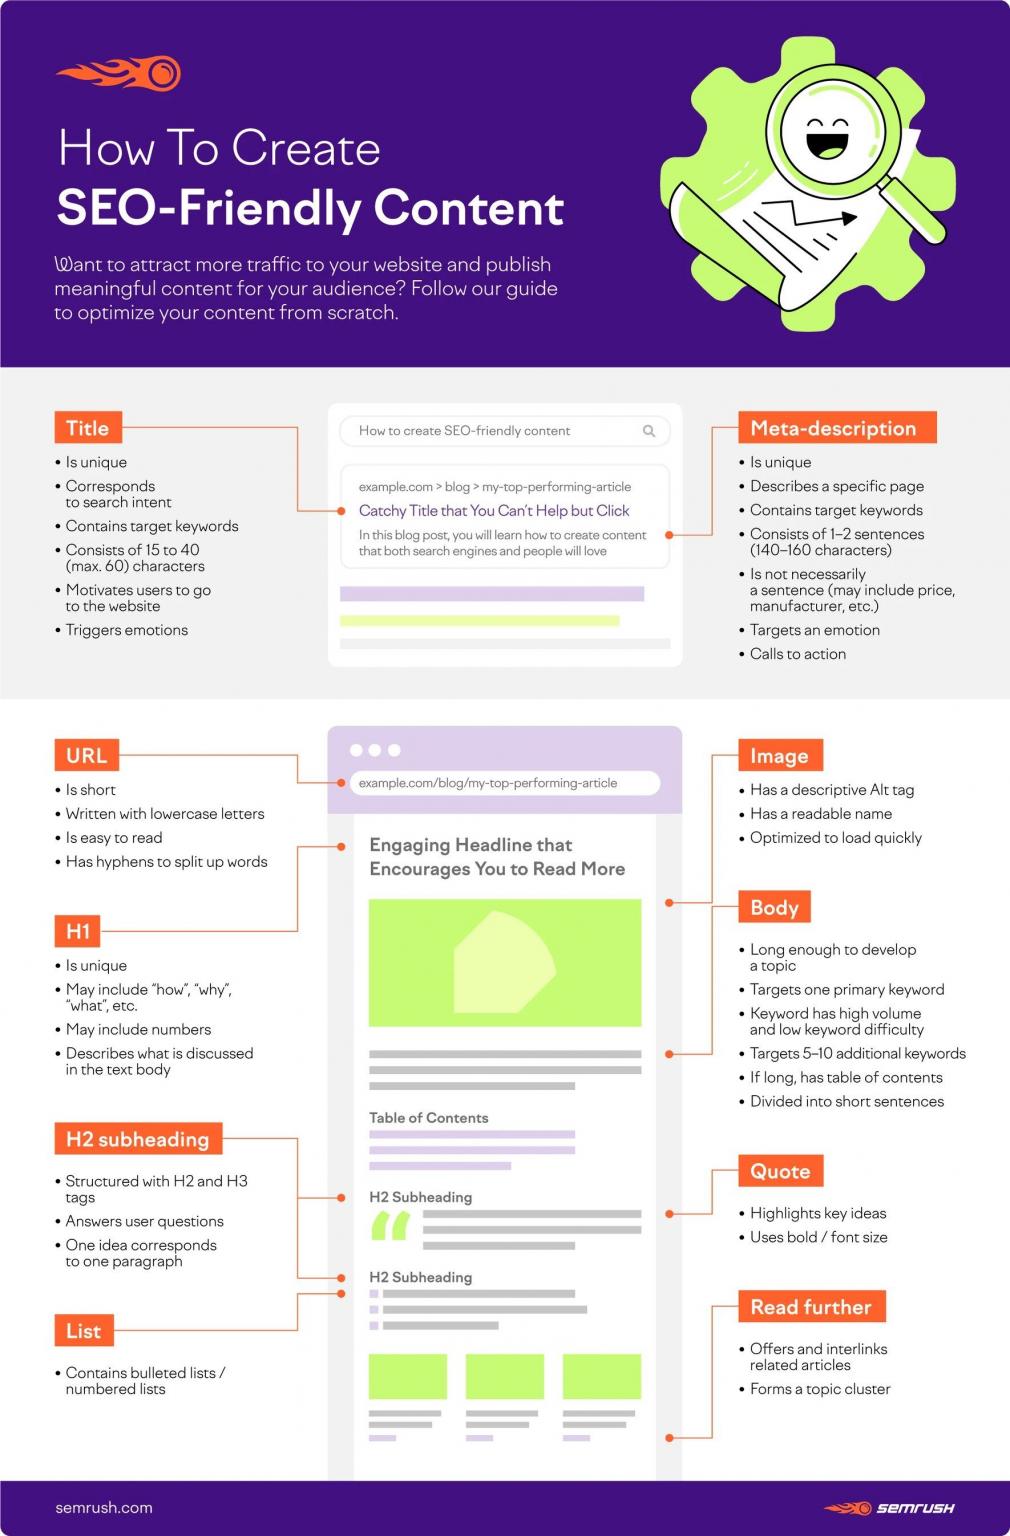 How to Create SEO-Friendly Content Infographic